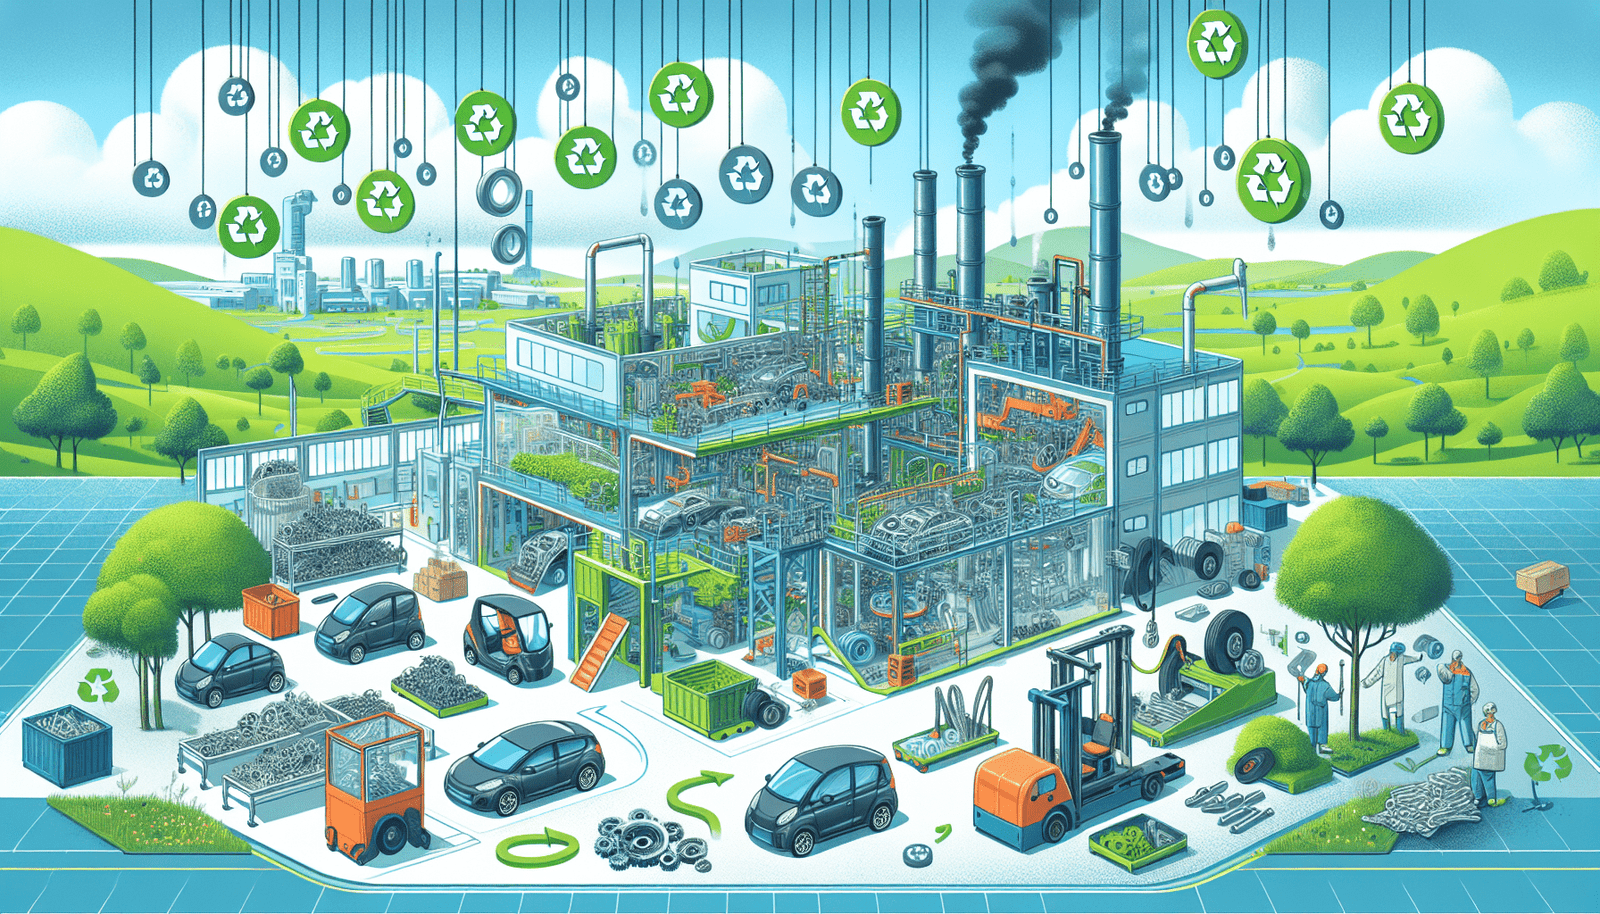 What Are The Environmental Benefits Of Using Recycled Materials In EV Manufacturing?